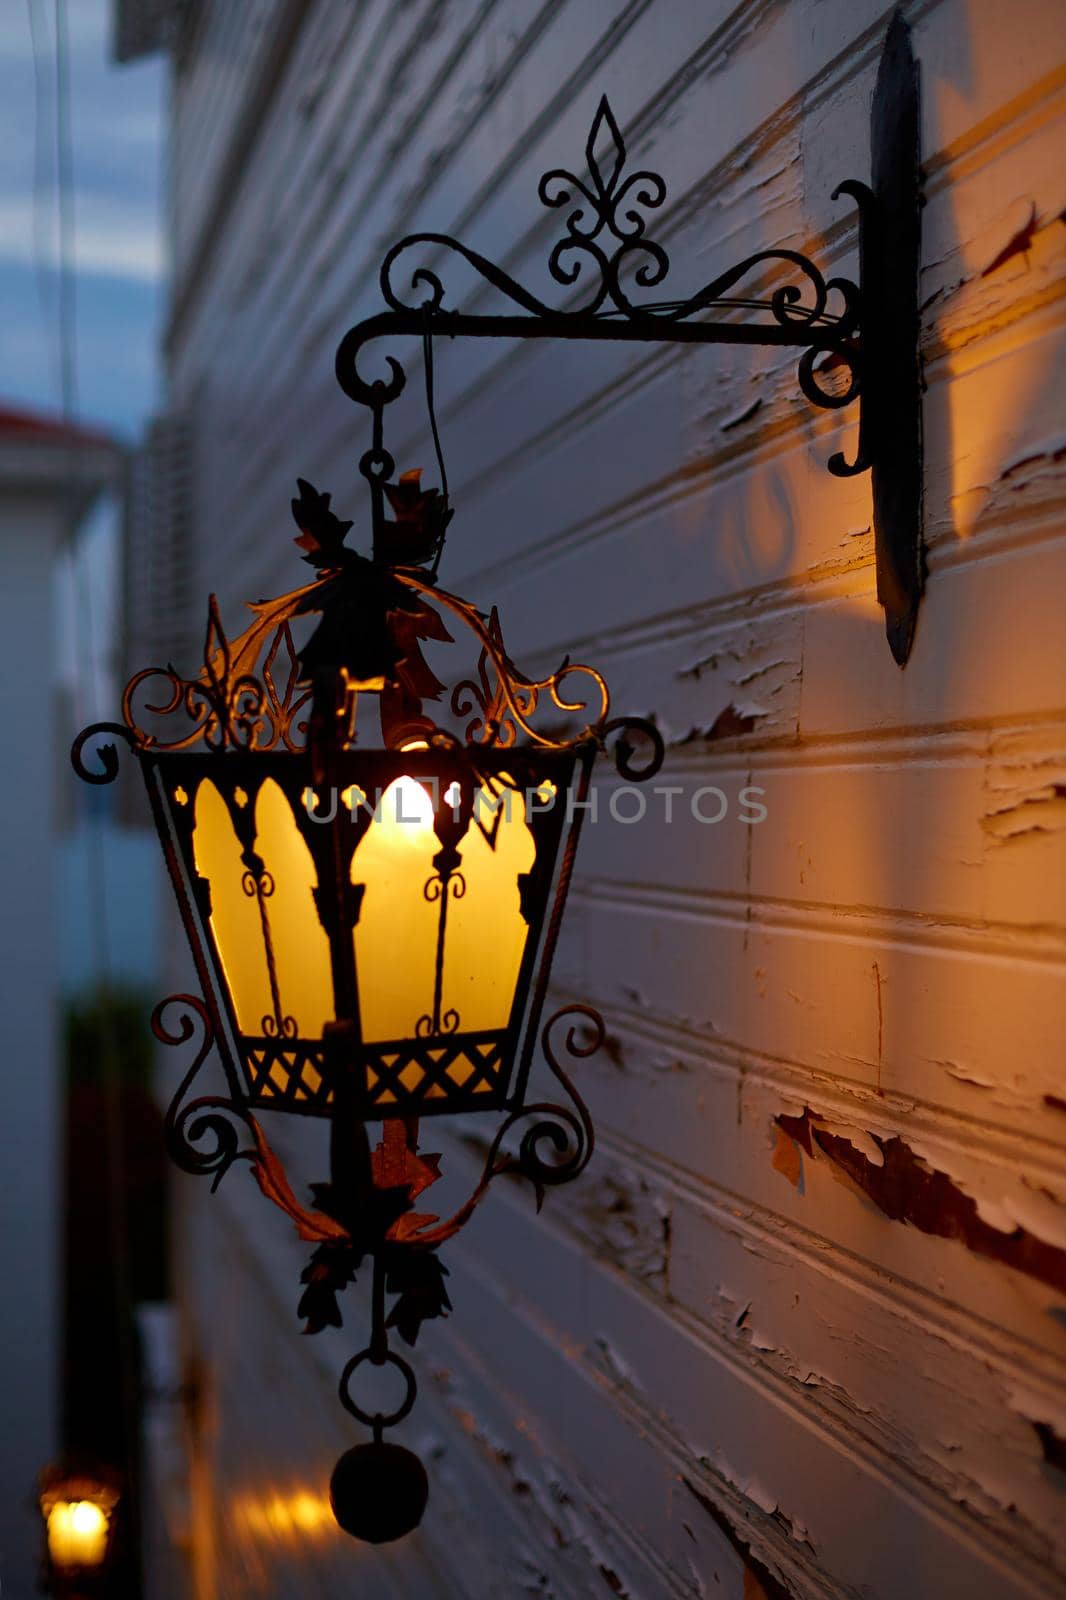 Glowing old street lamp lighting on the facade of the house. Twilight on the street of the old city.